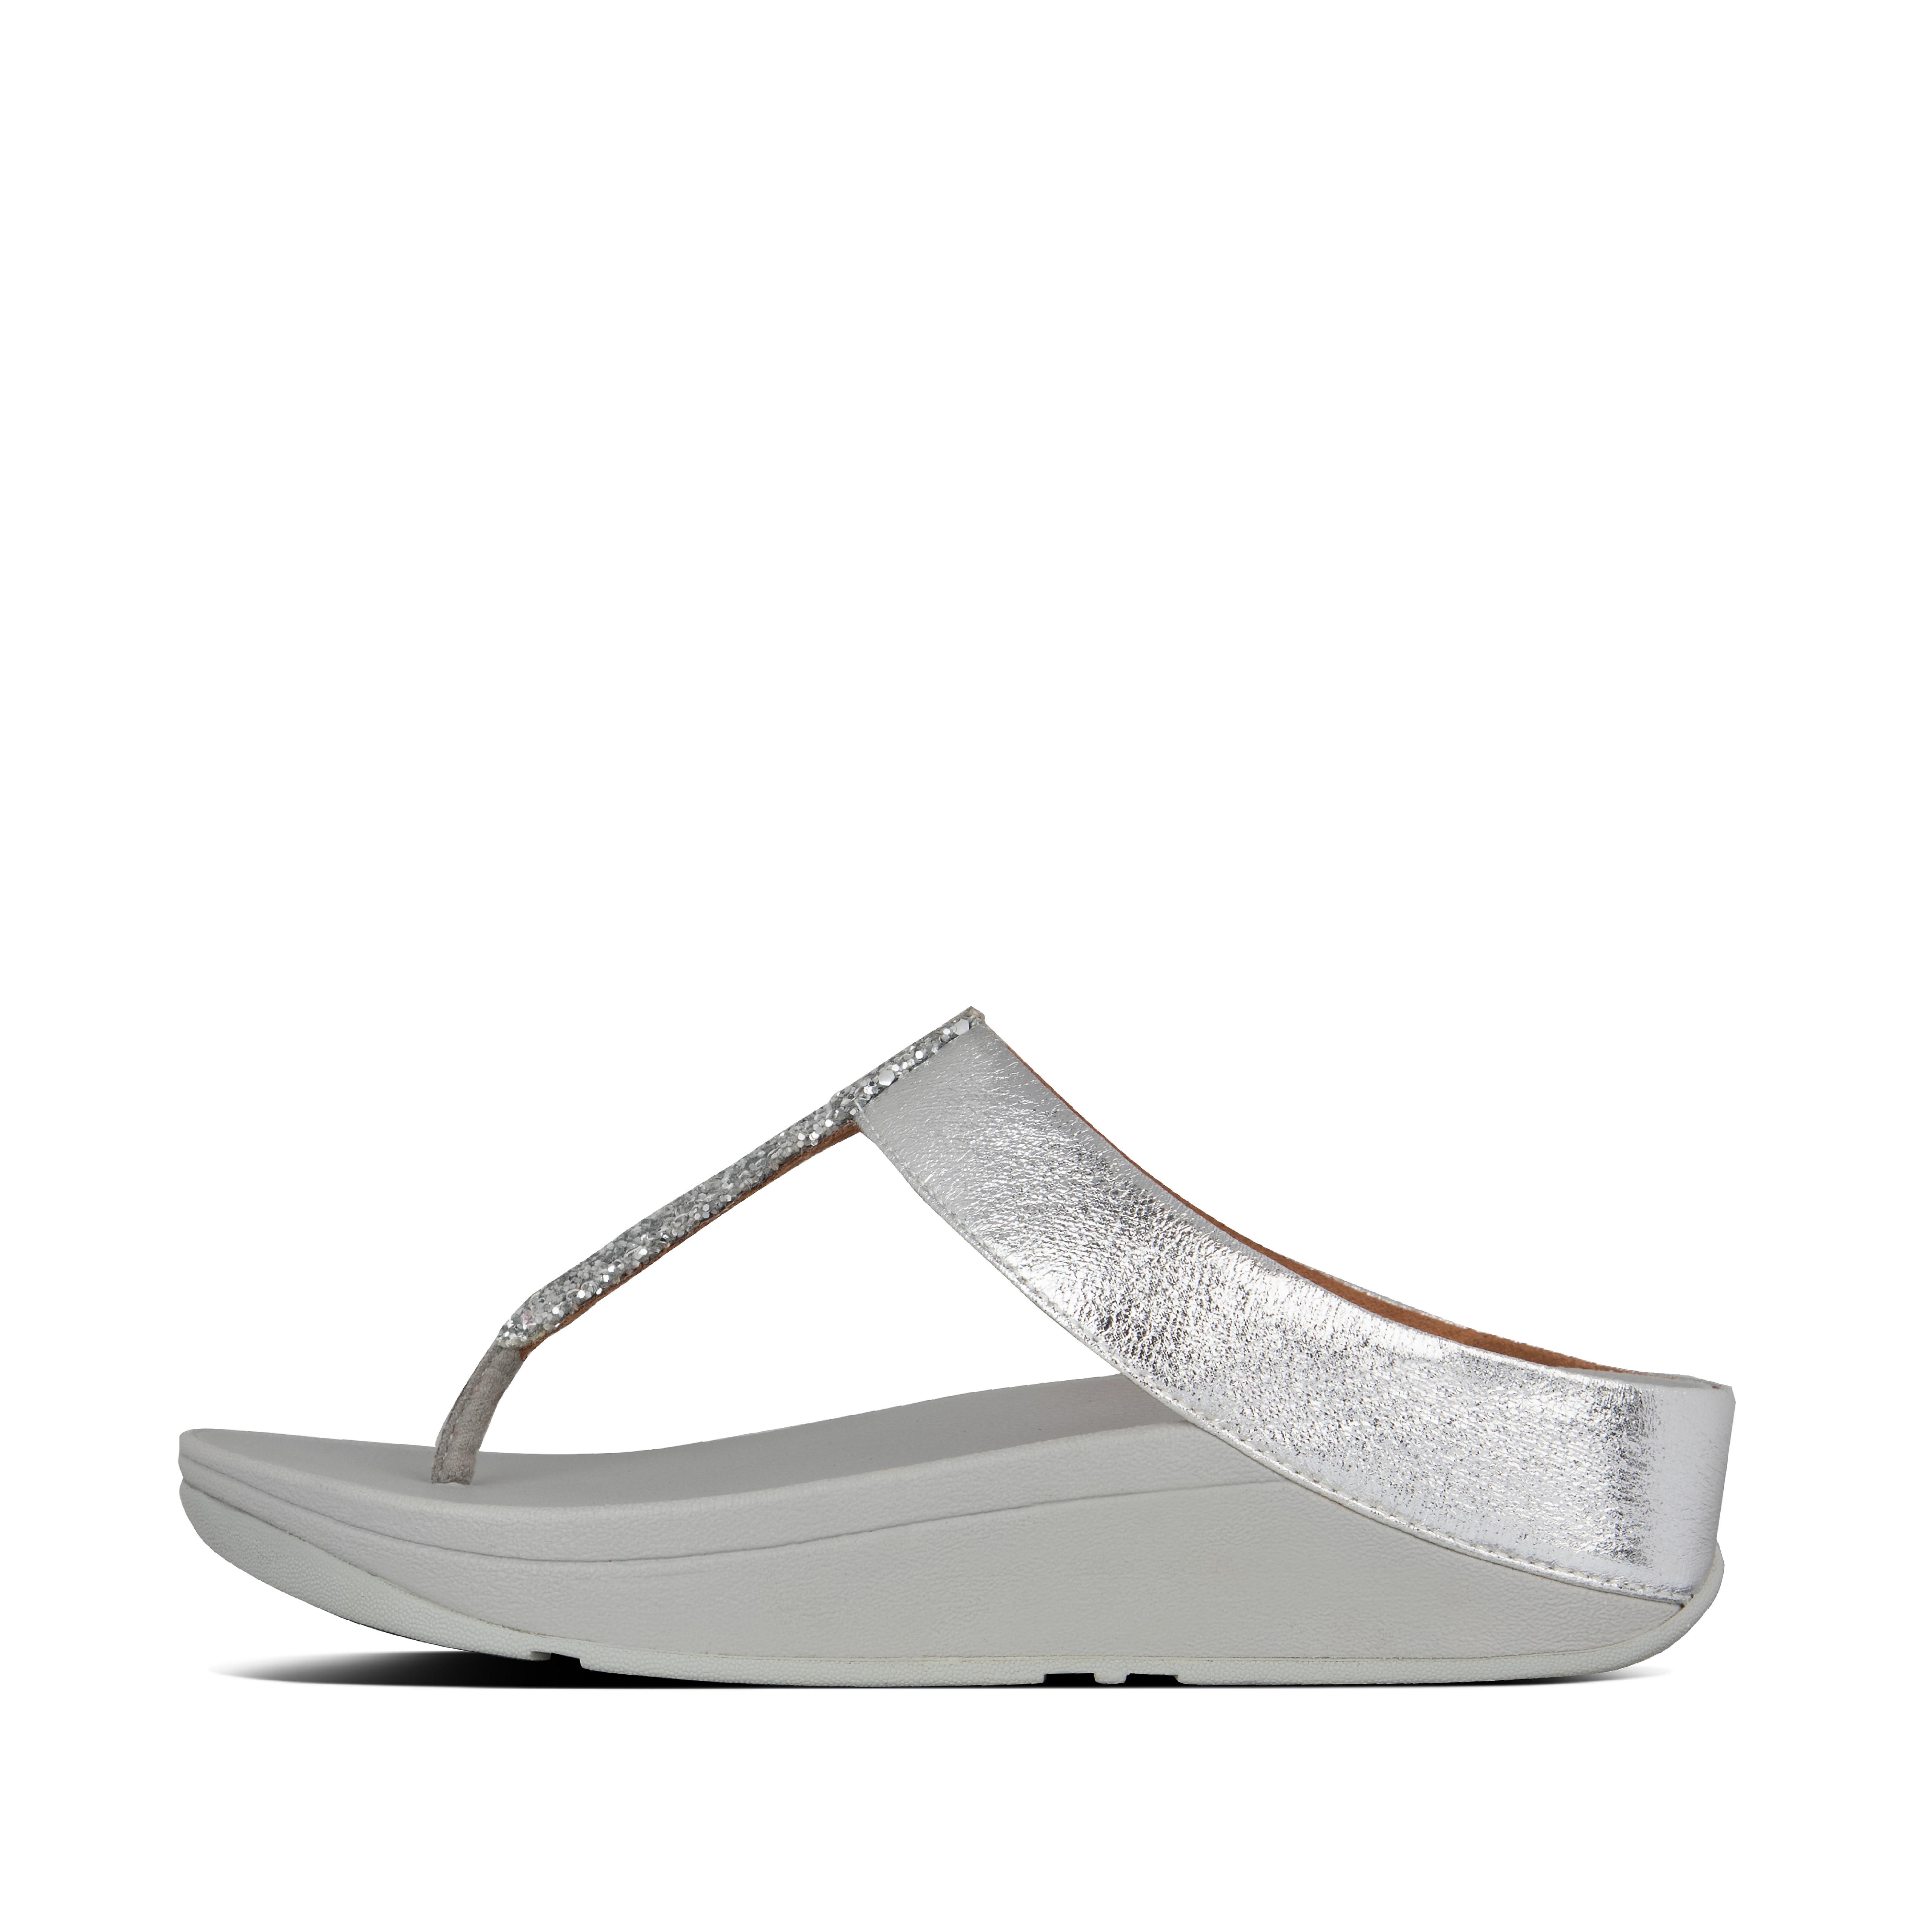 silver toe post sandals